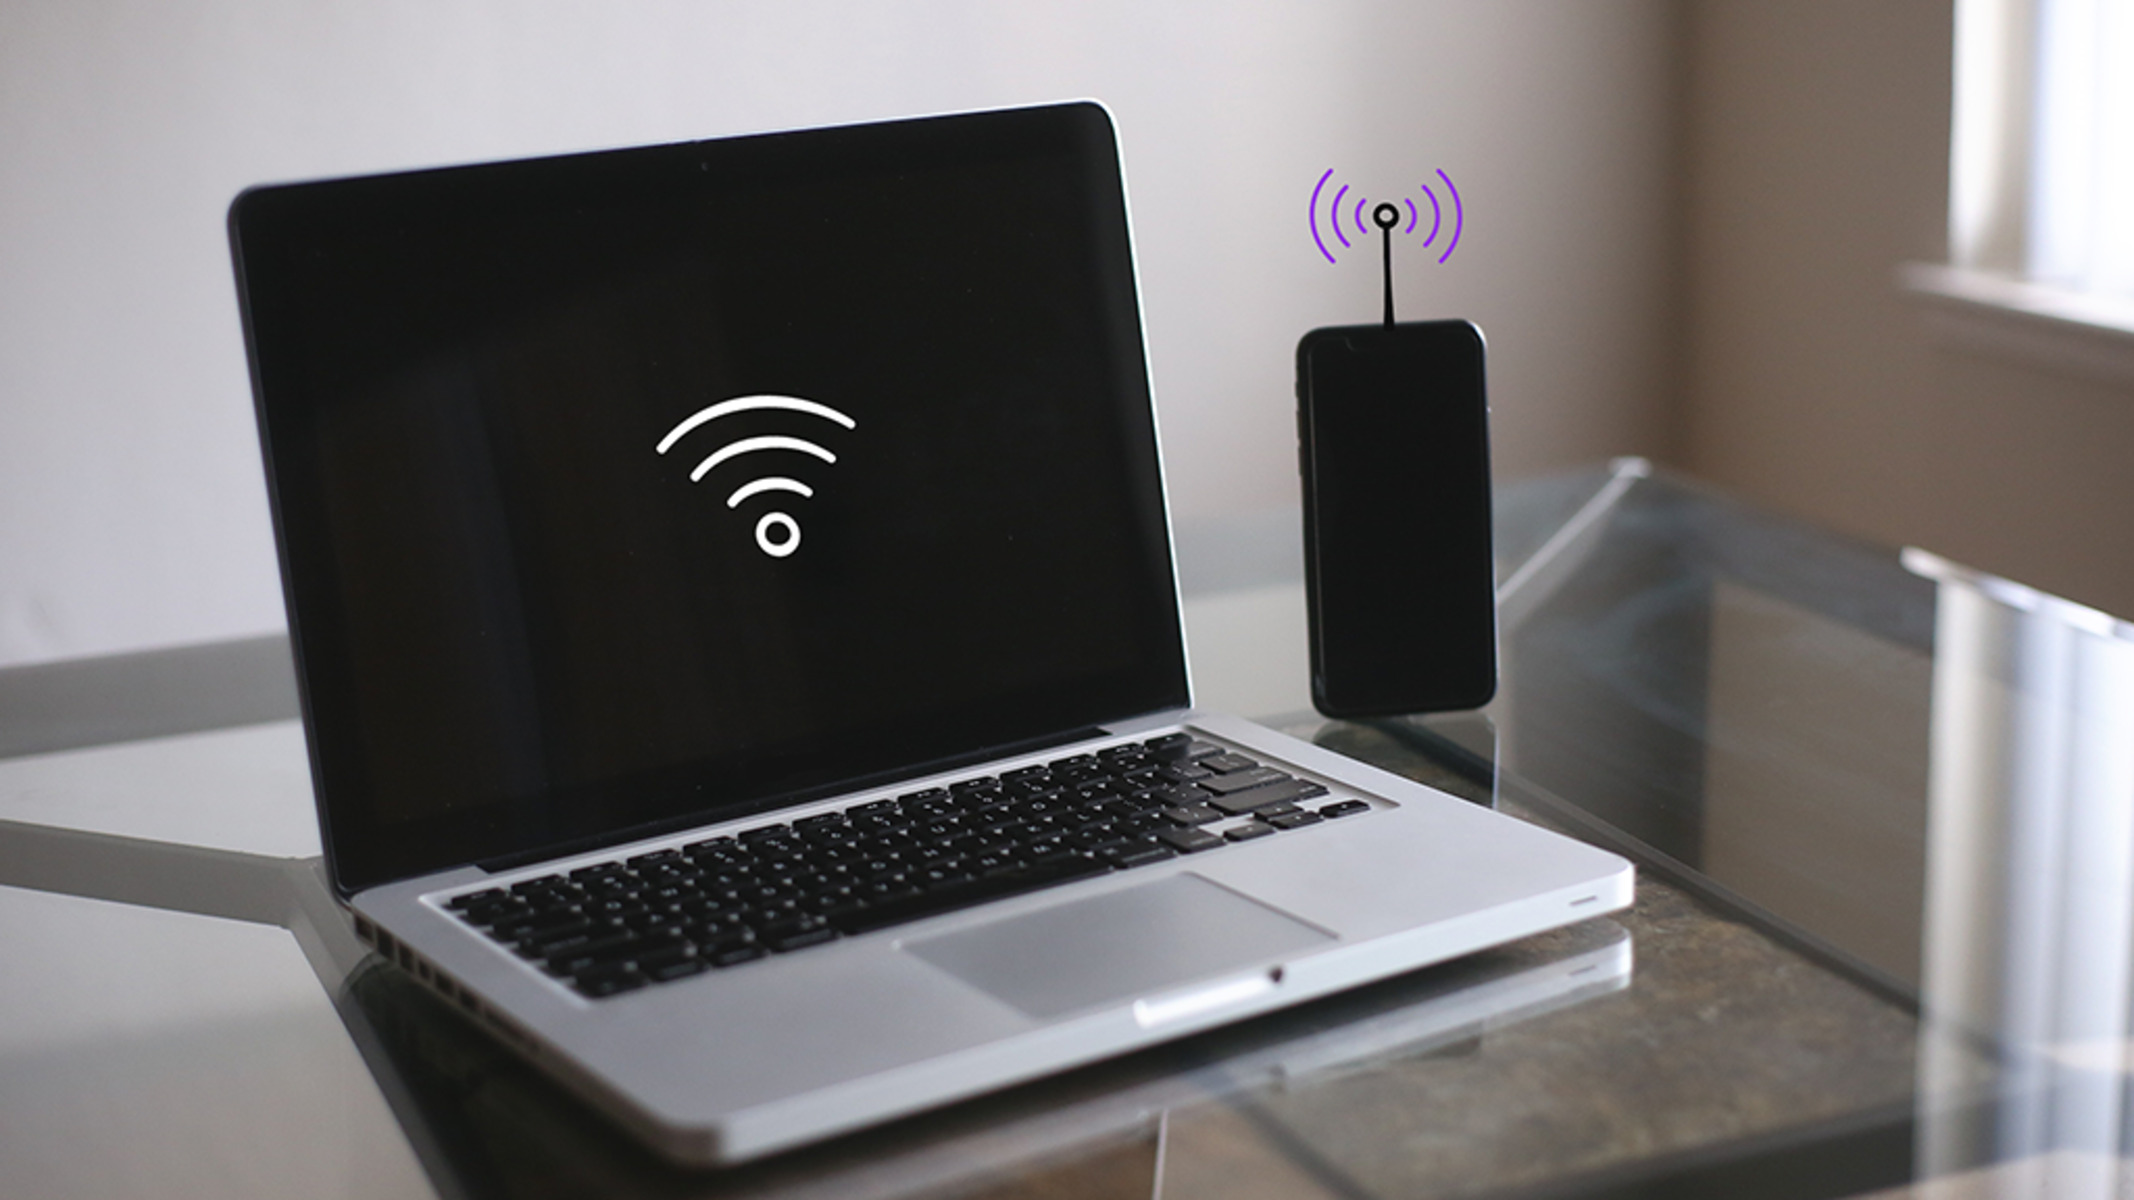 Connecting Your IPhone Hotspot To Laptop: Step-by-Step